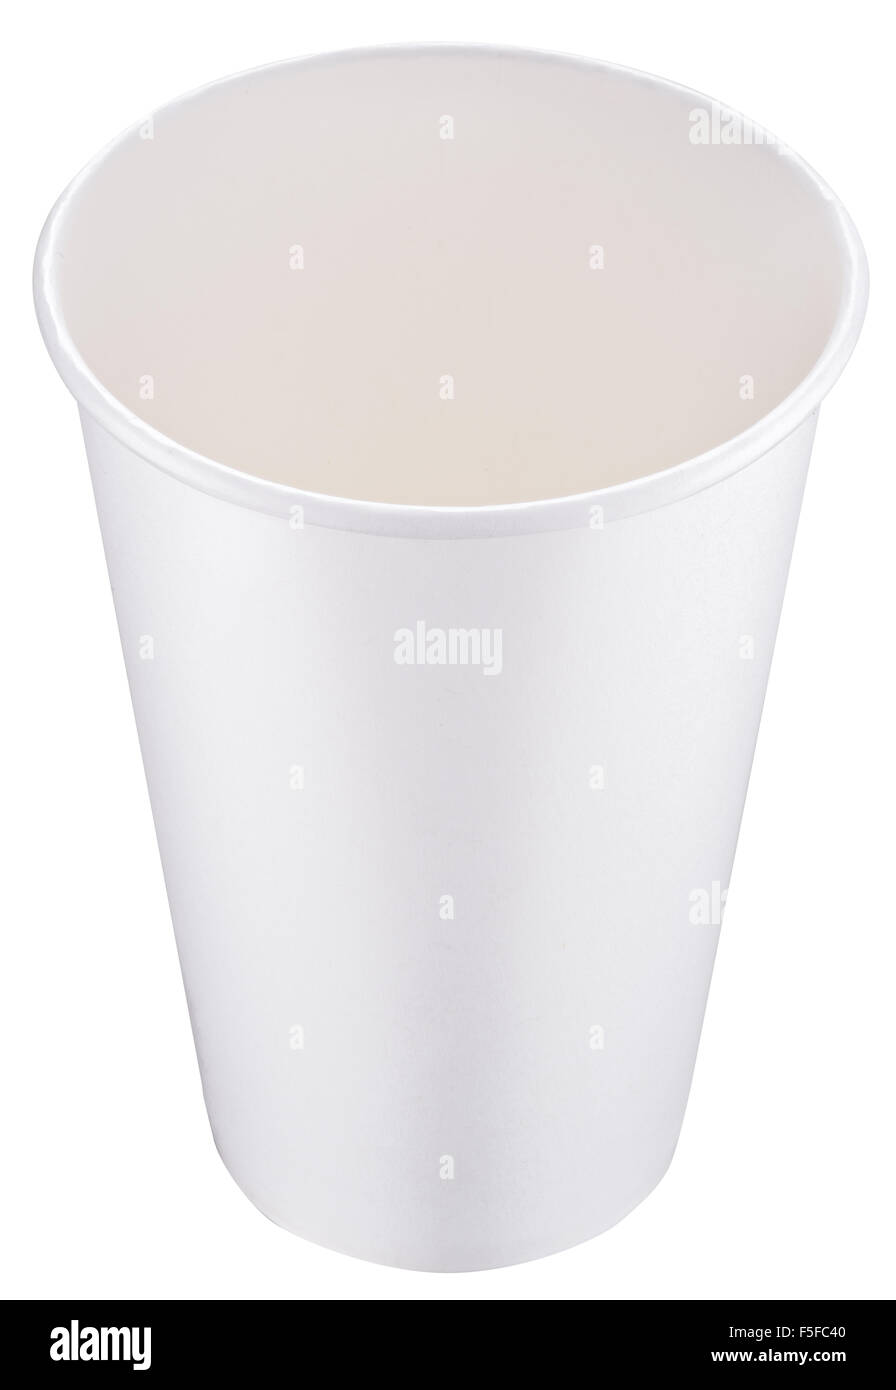 White plastic cup. File contains clipping paths. Stock Photo